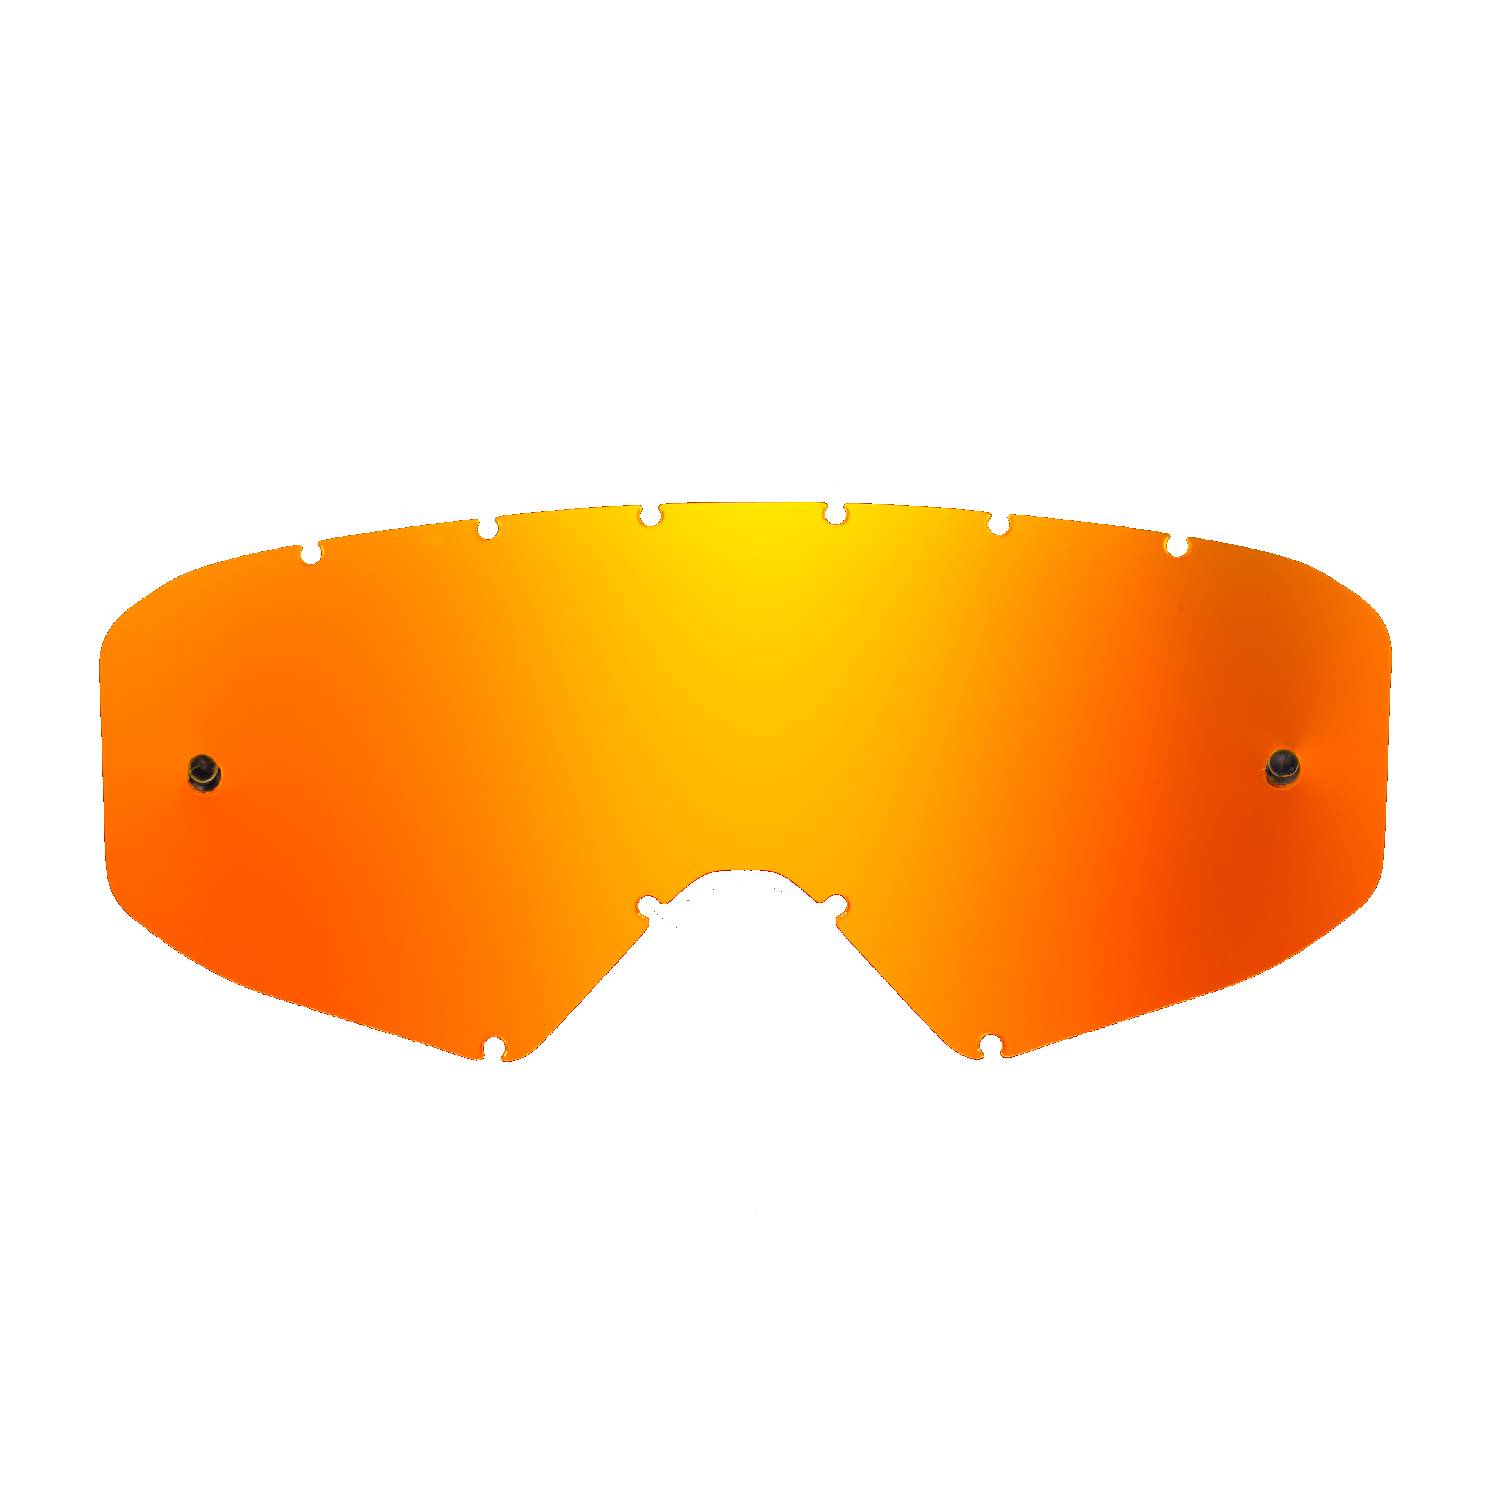 red-toned mirrored replacement lenses for mx goggles compatible for Ethen Zerocinque Primis / R / Ares / Ares Pluma cross goggles / goggles